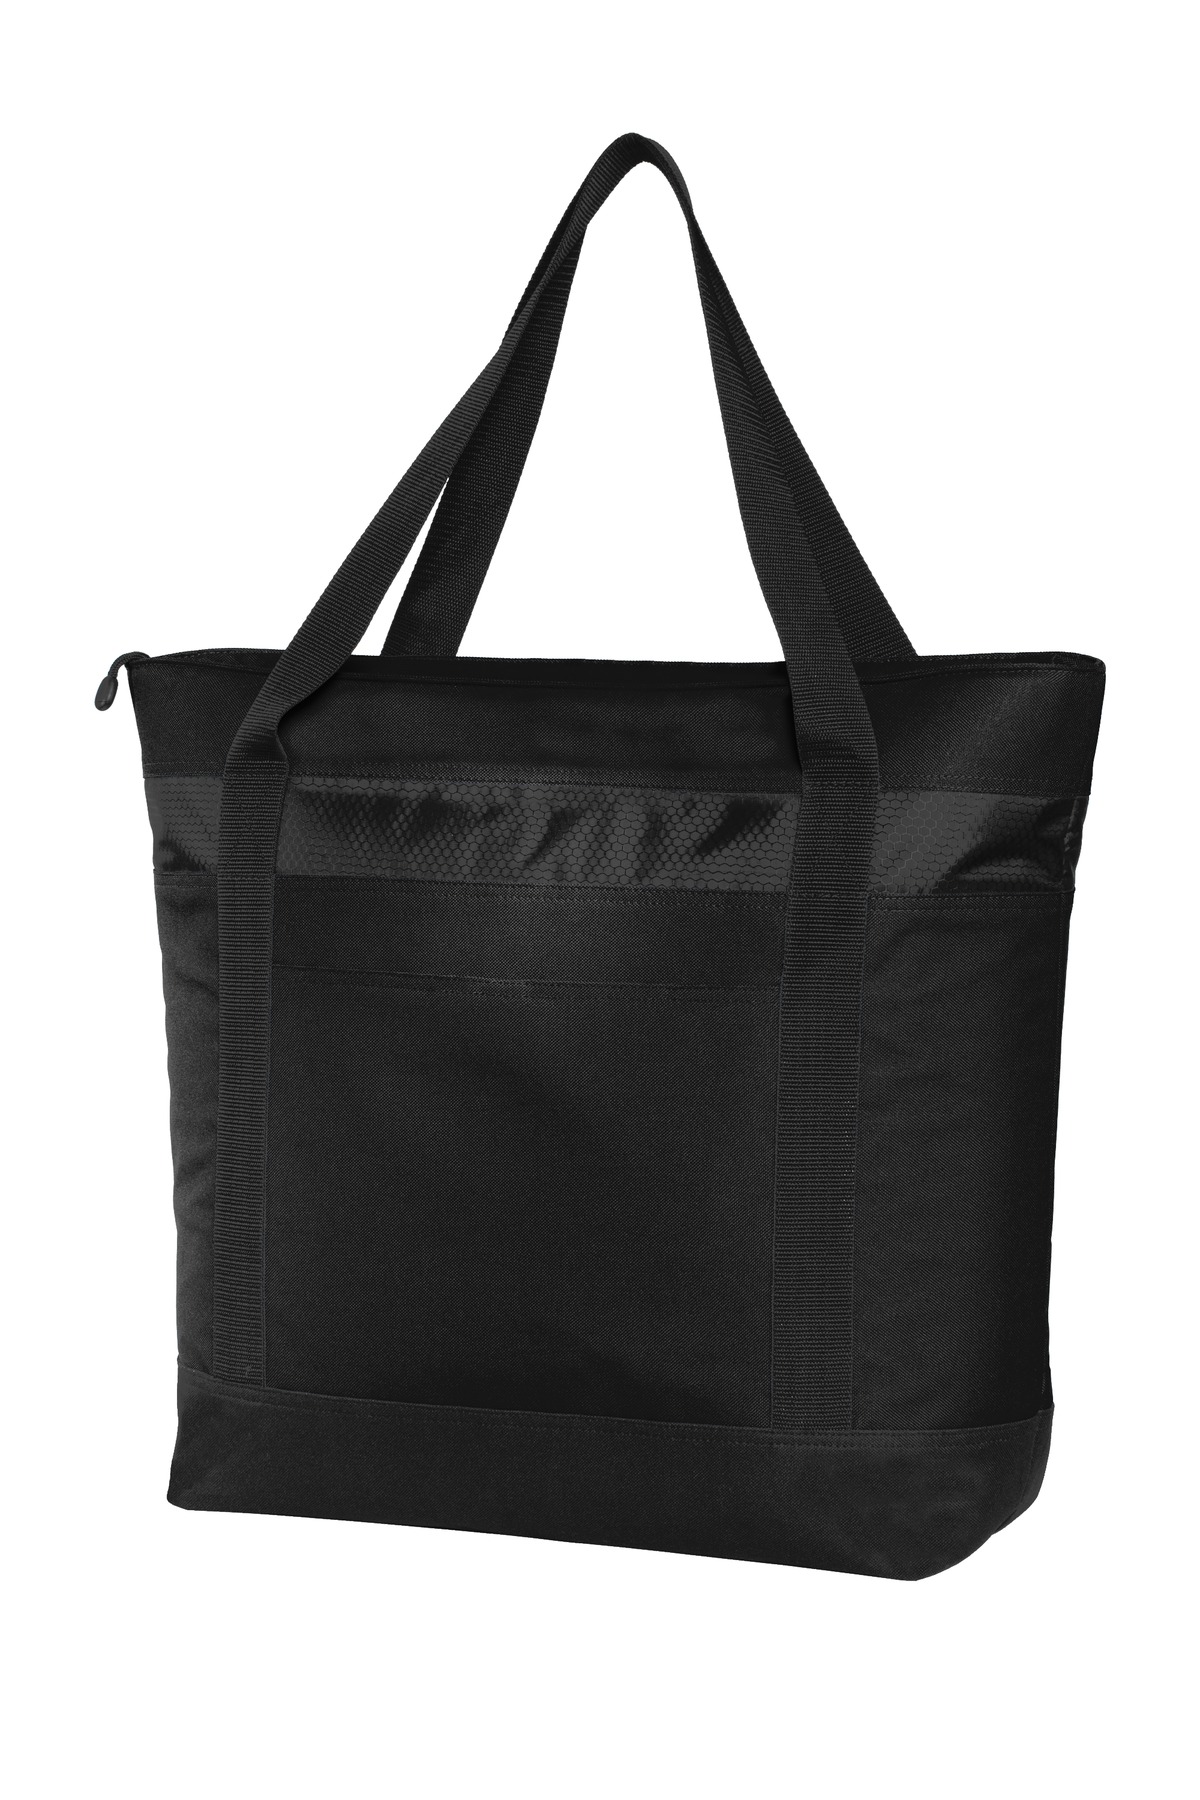 Port Authority Large Tote Cooler-Port Authority